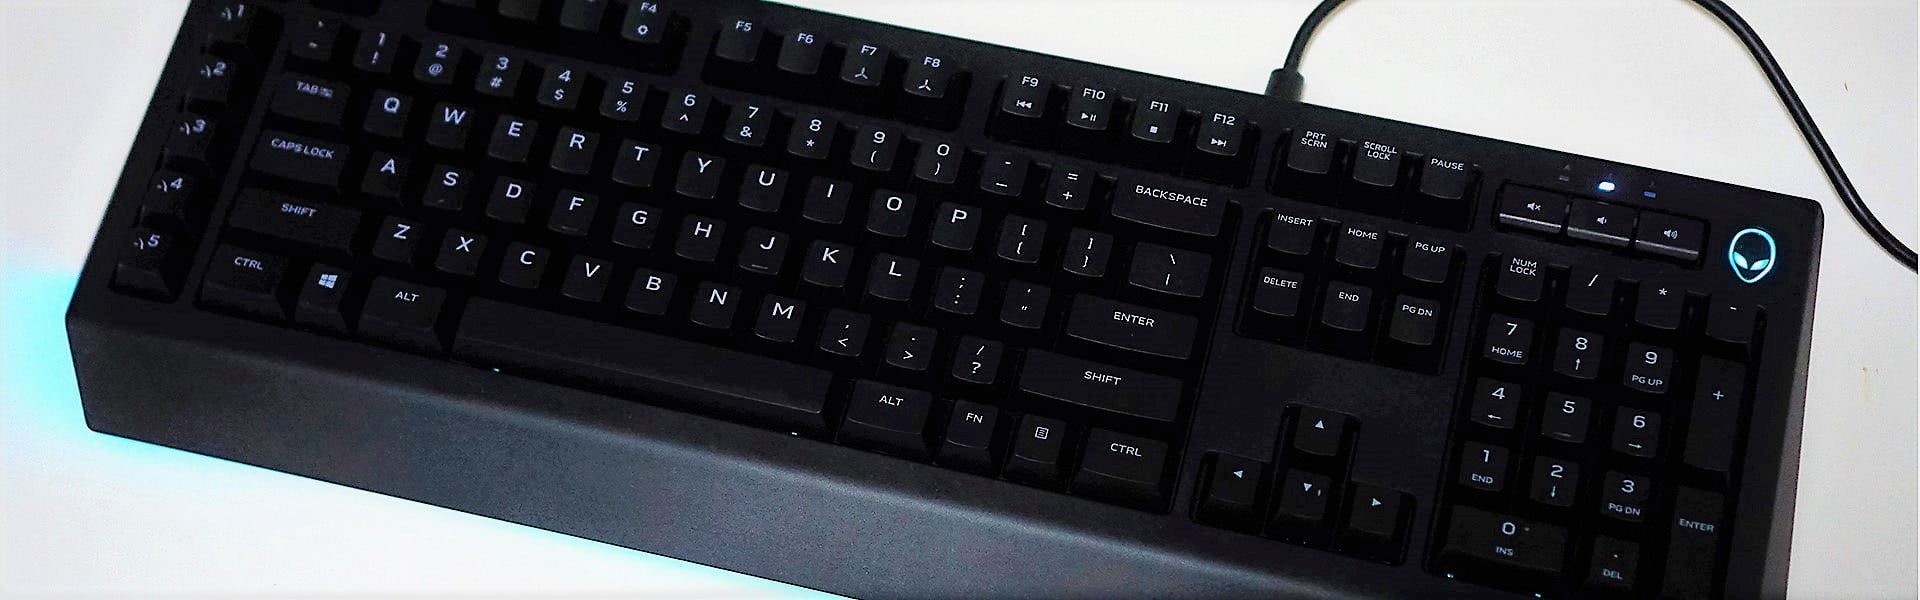 Alienware AW568 Keyboard Review 13